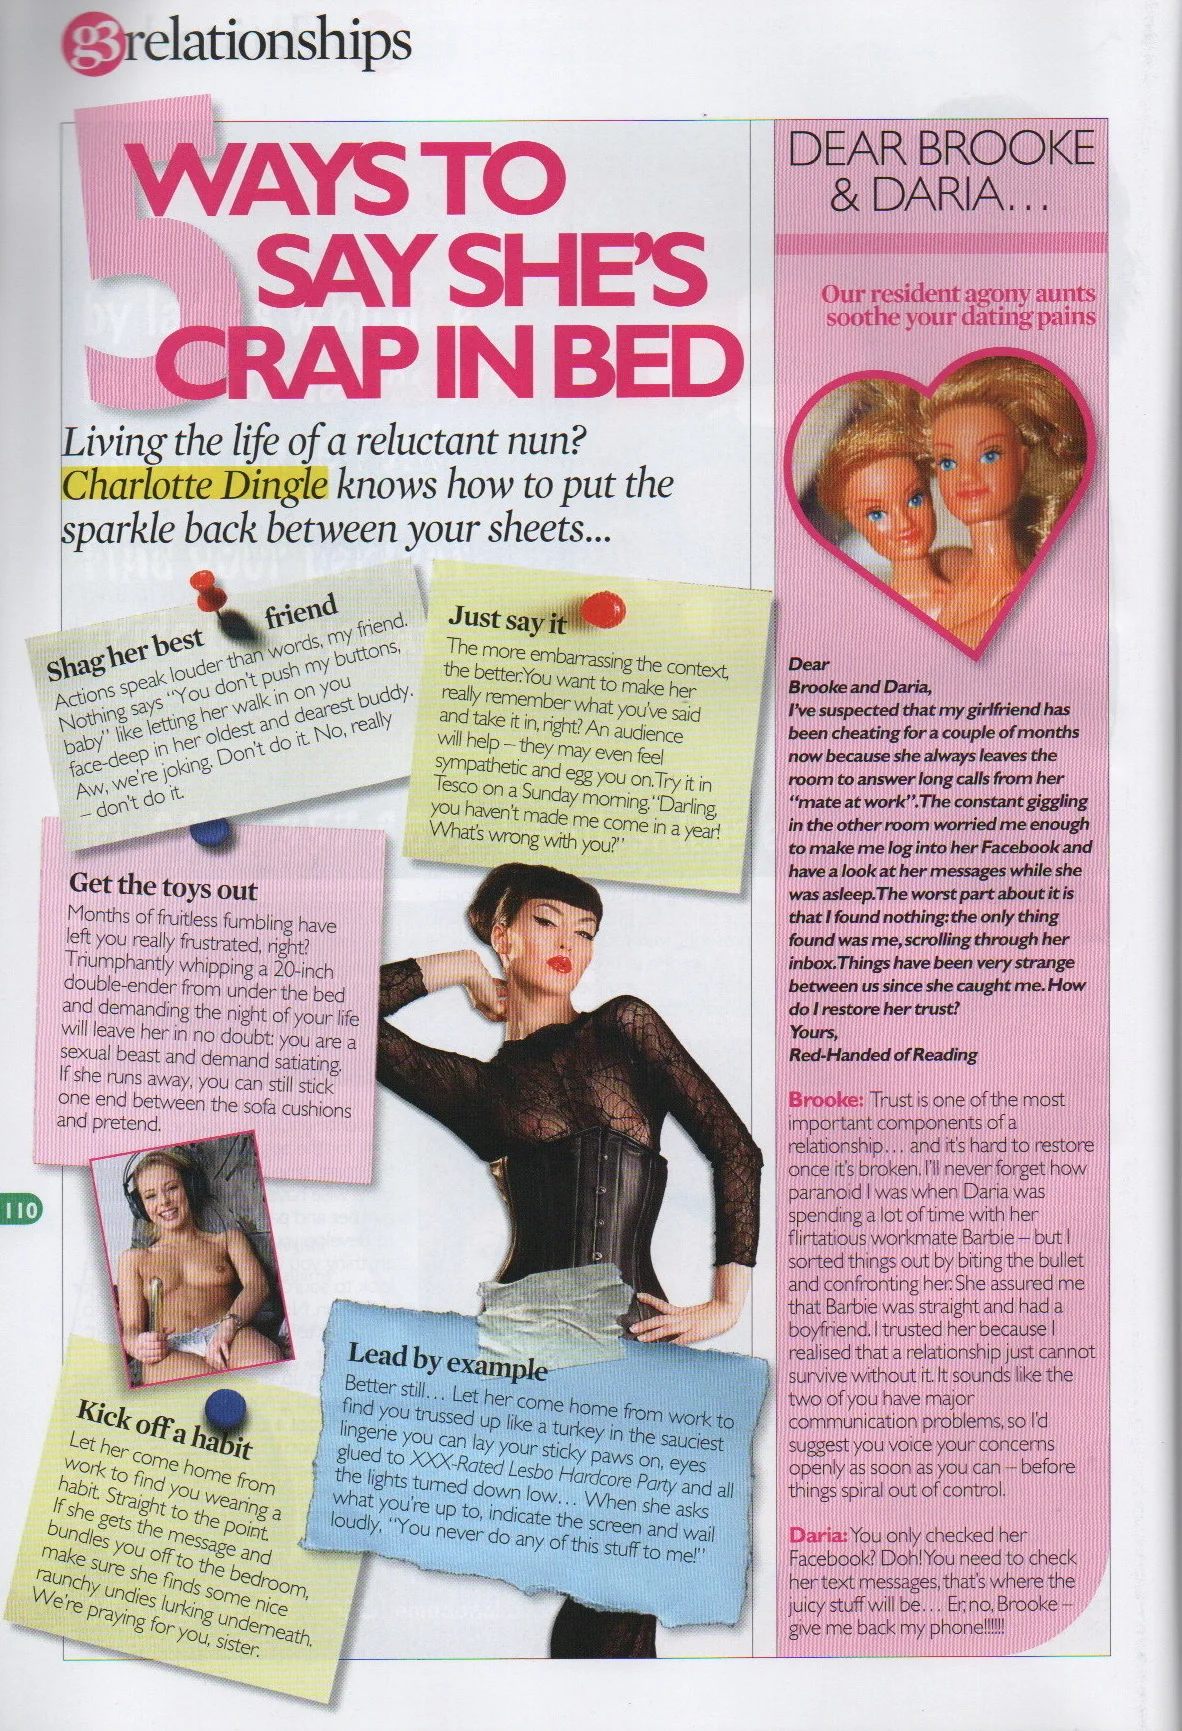 Image of g3's agony aunt page from the July 2004 edition, titled '5 ways to say she's crap in bed'. 